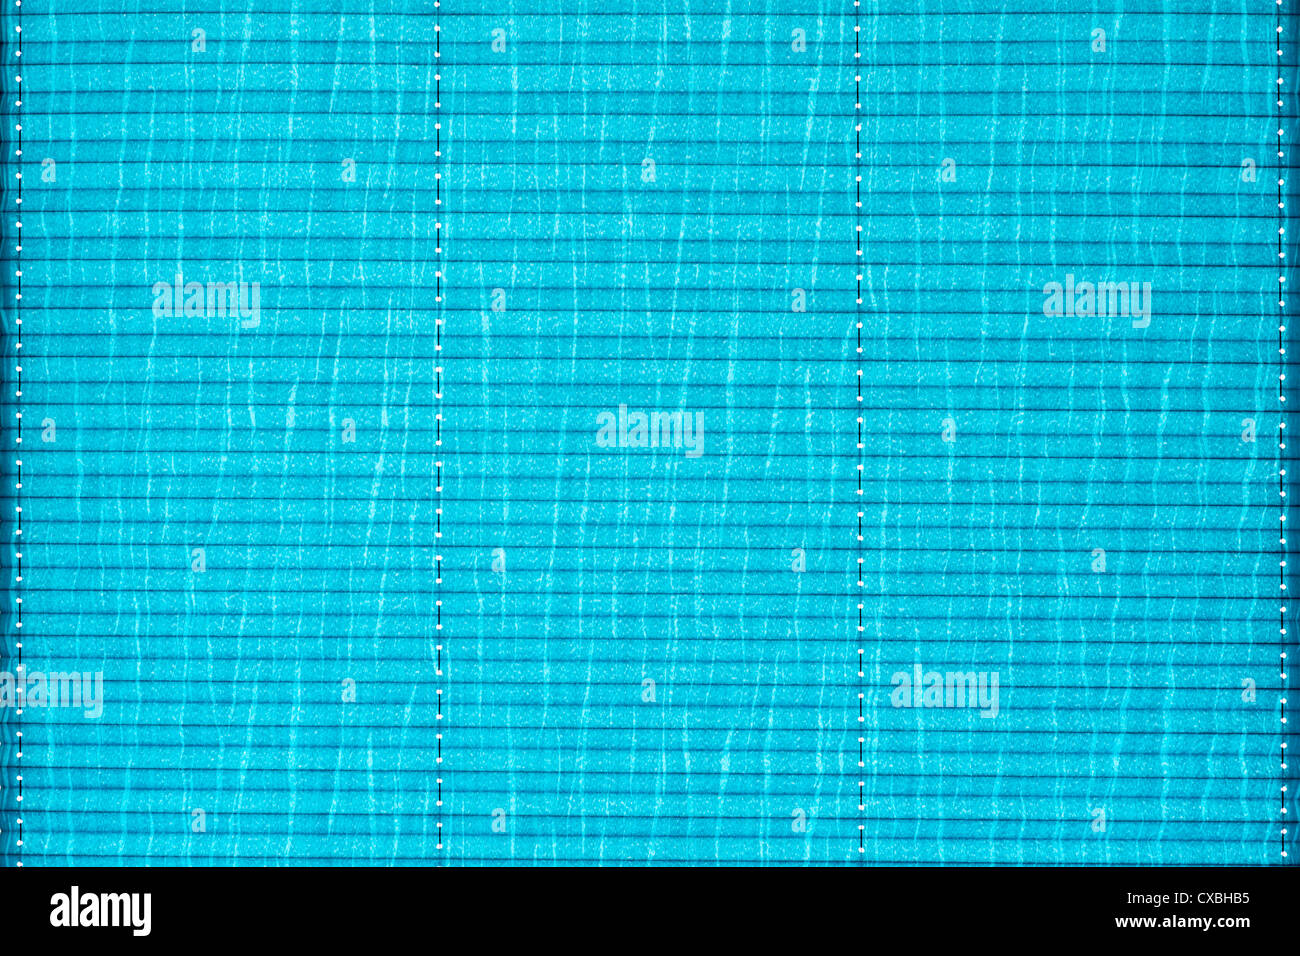 Blue abstract paper texture for background usage Stock Photo